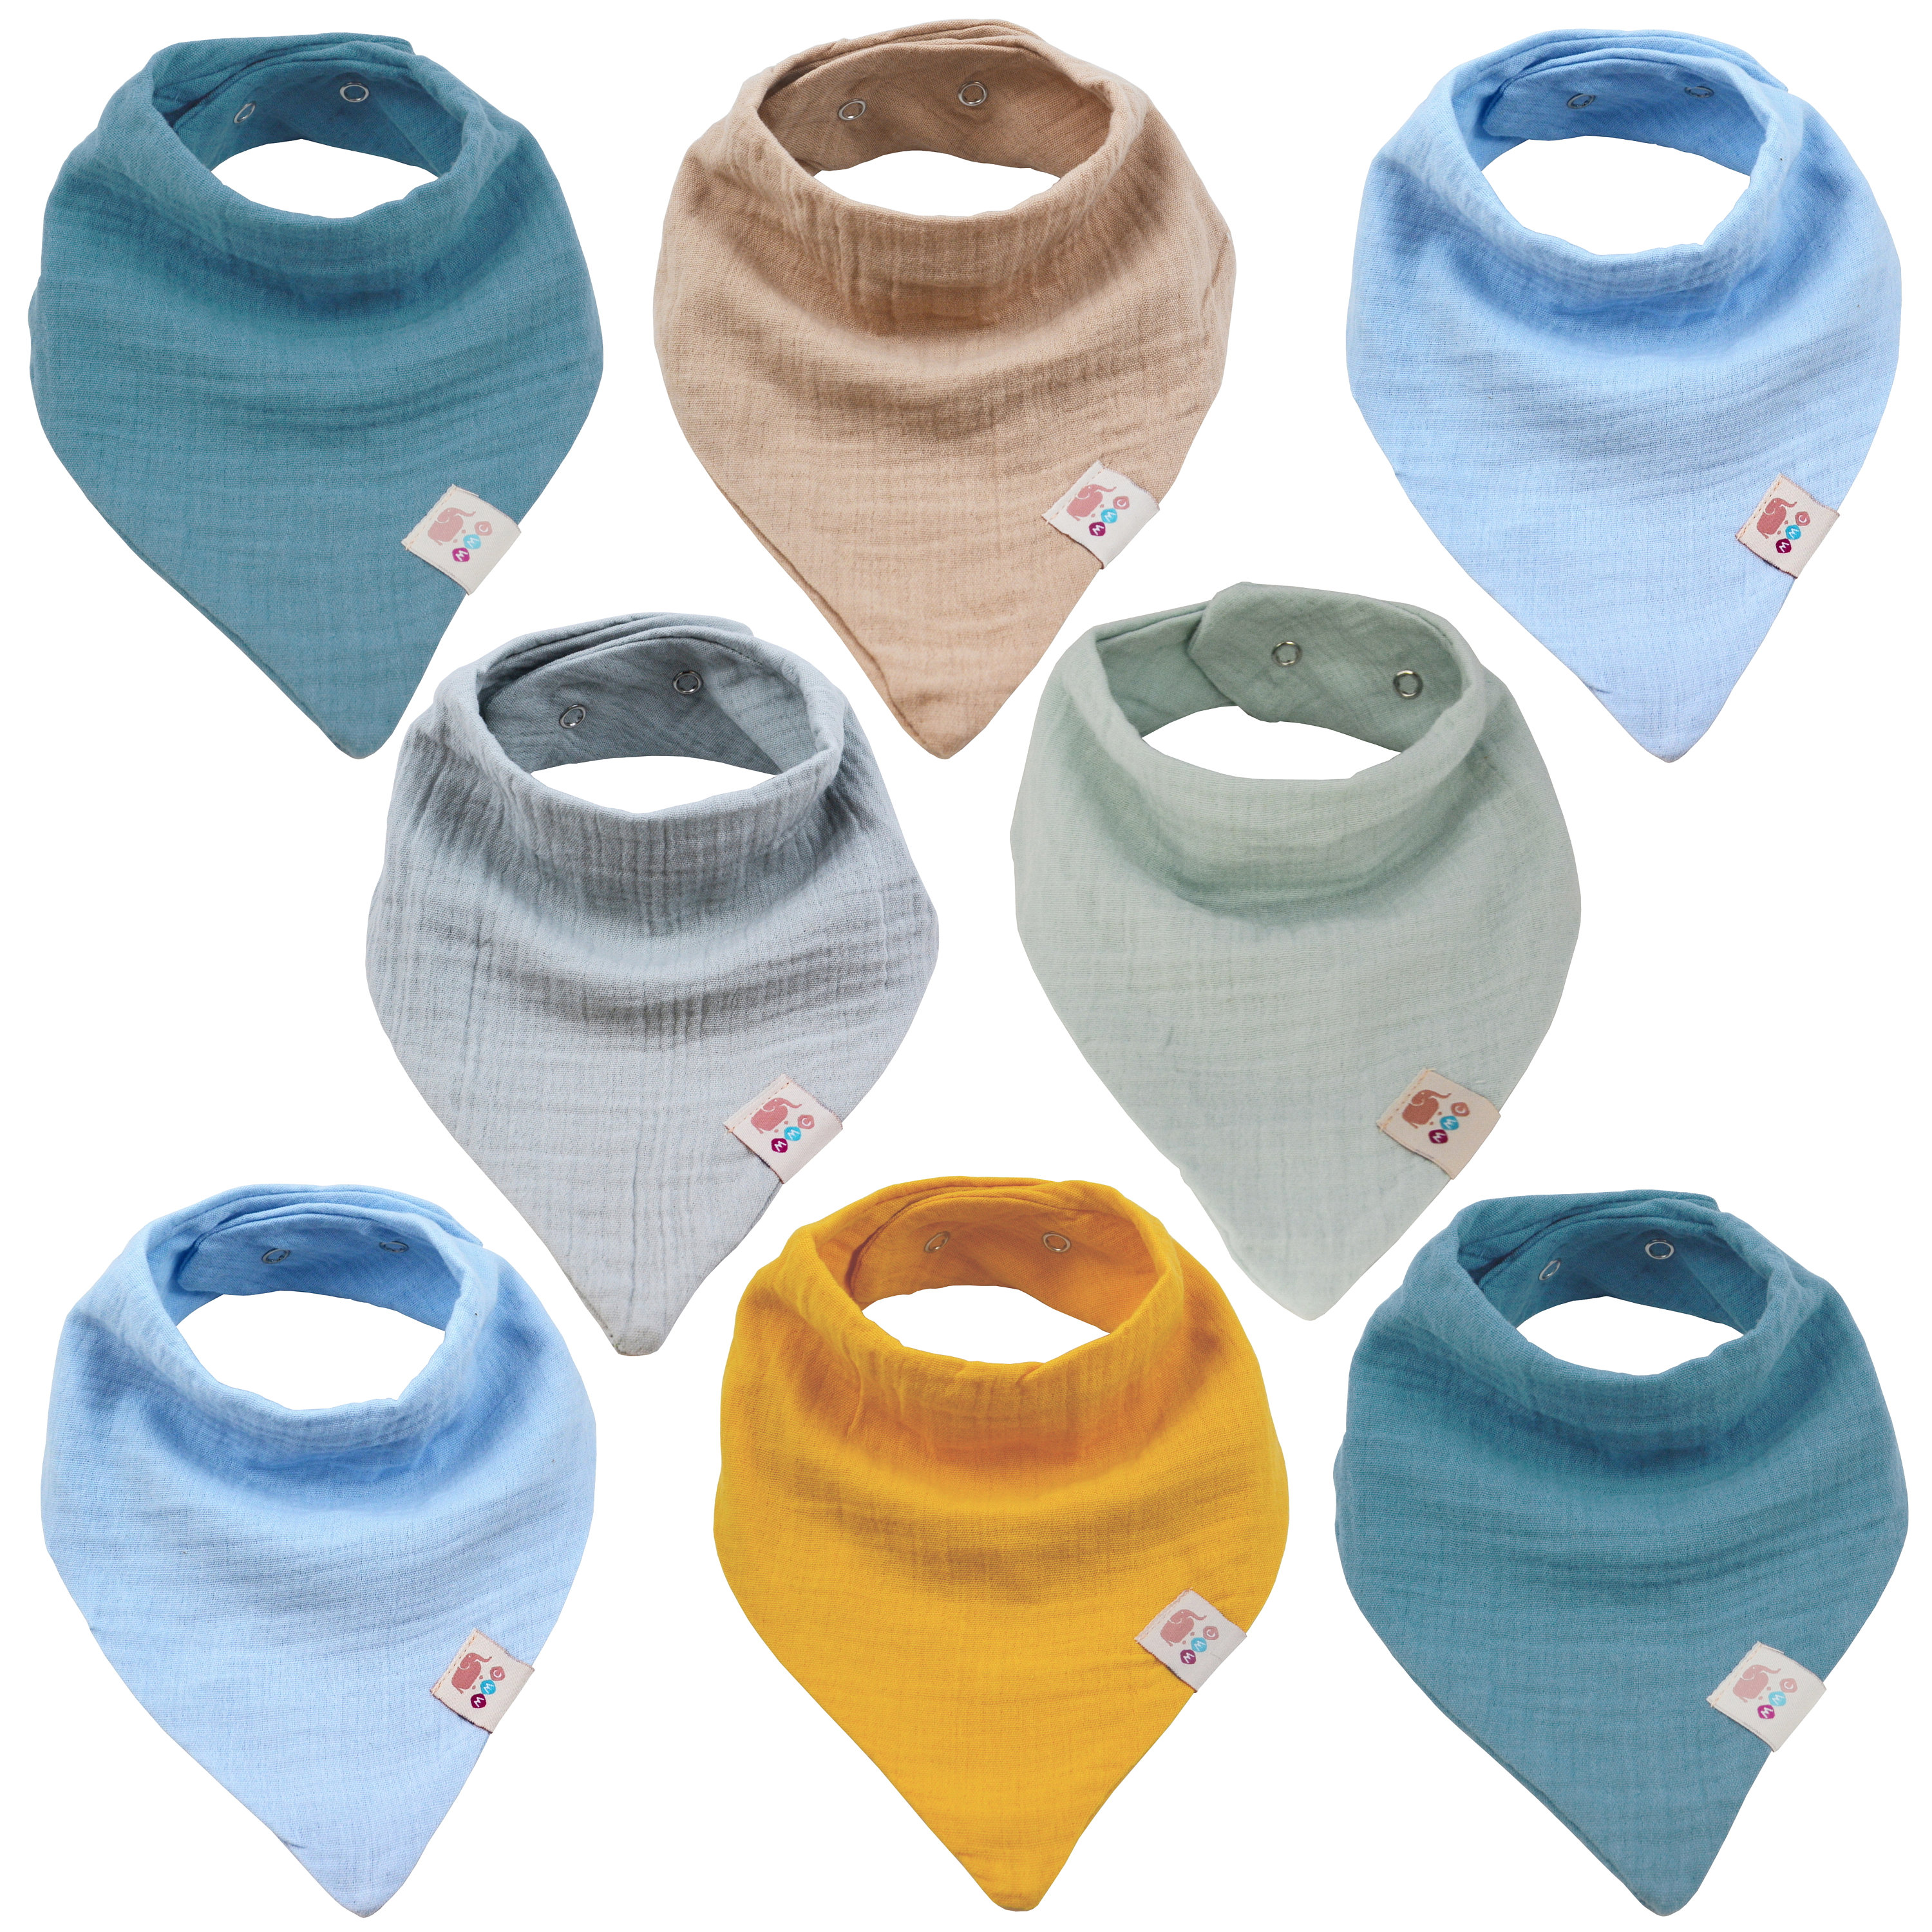  egmao baby Snap Bibs for Boys & Girls,12 Pack Drooling